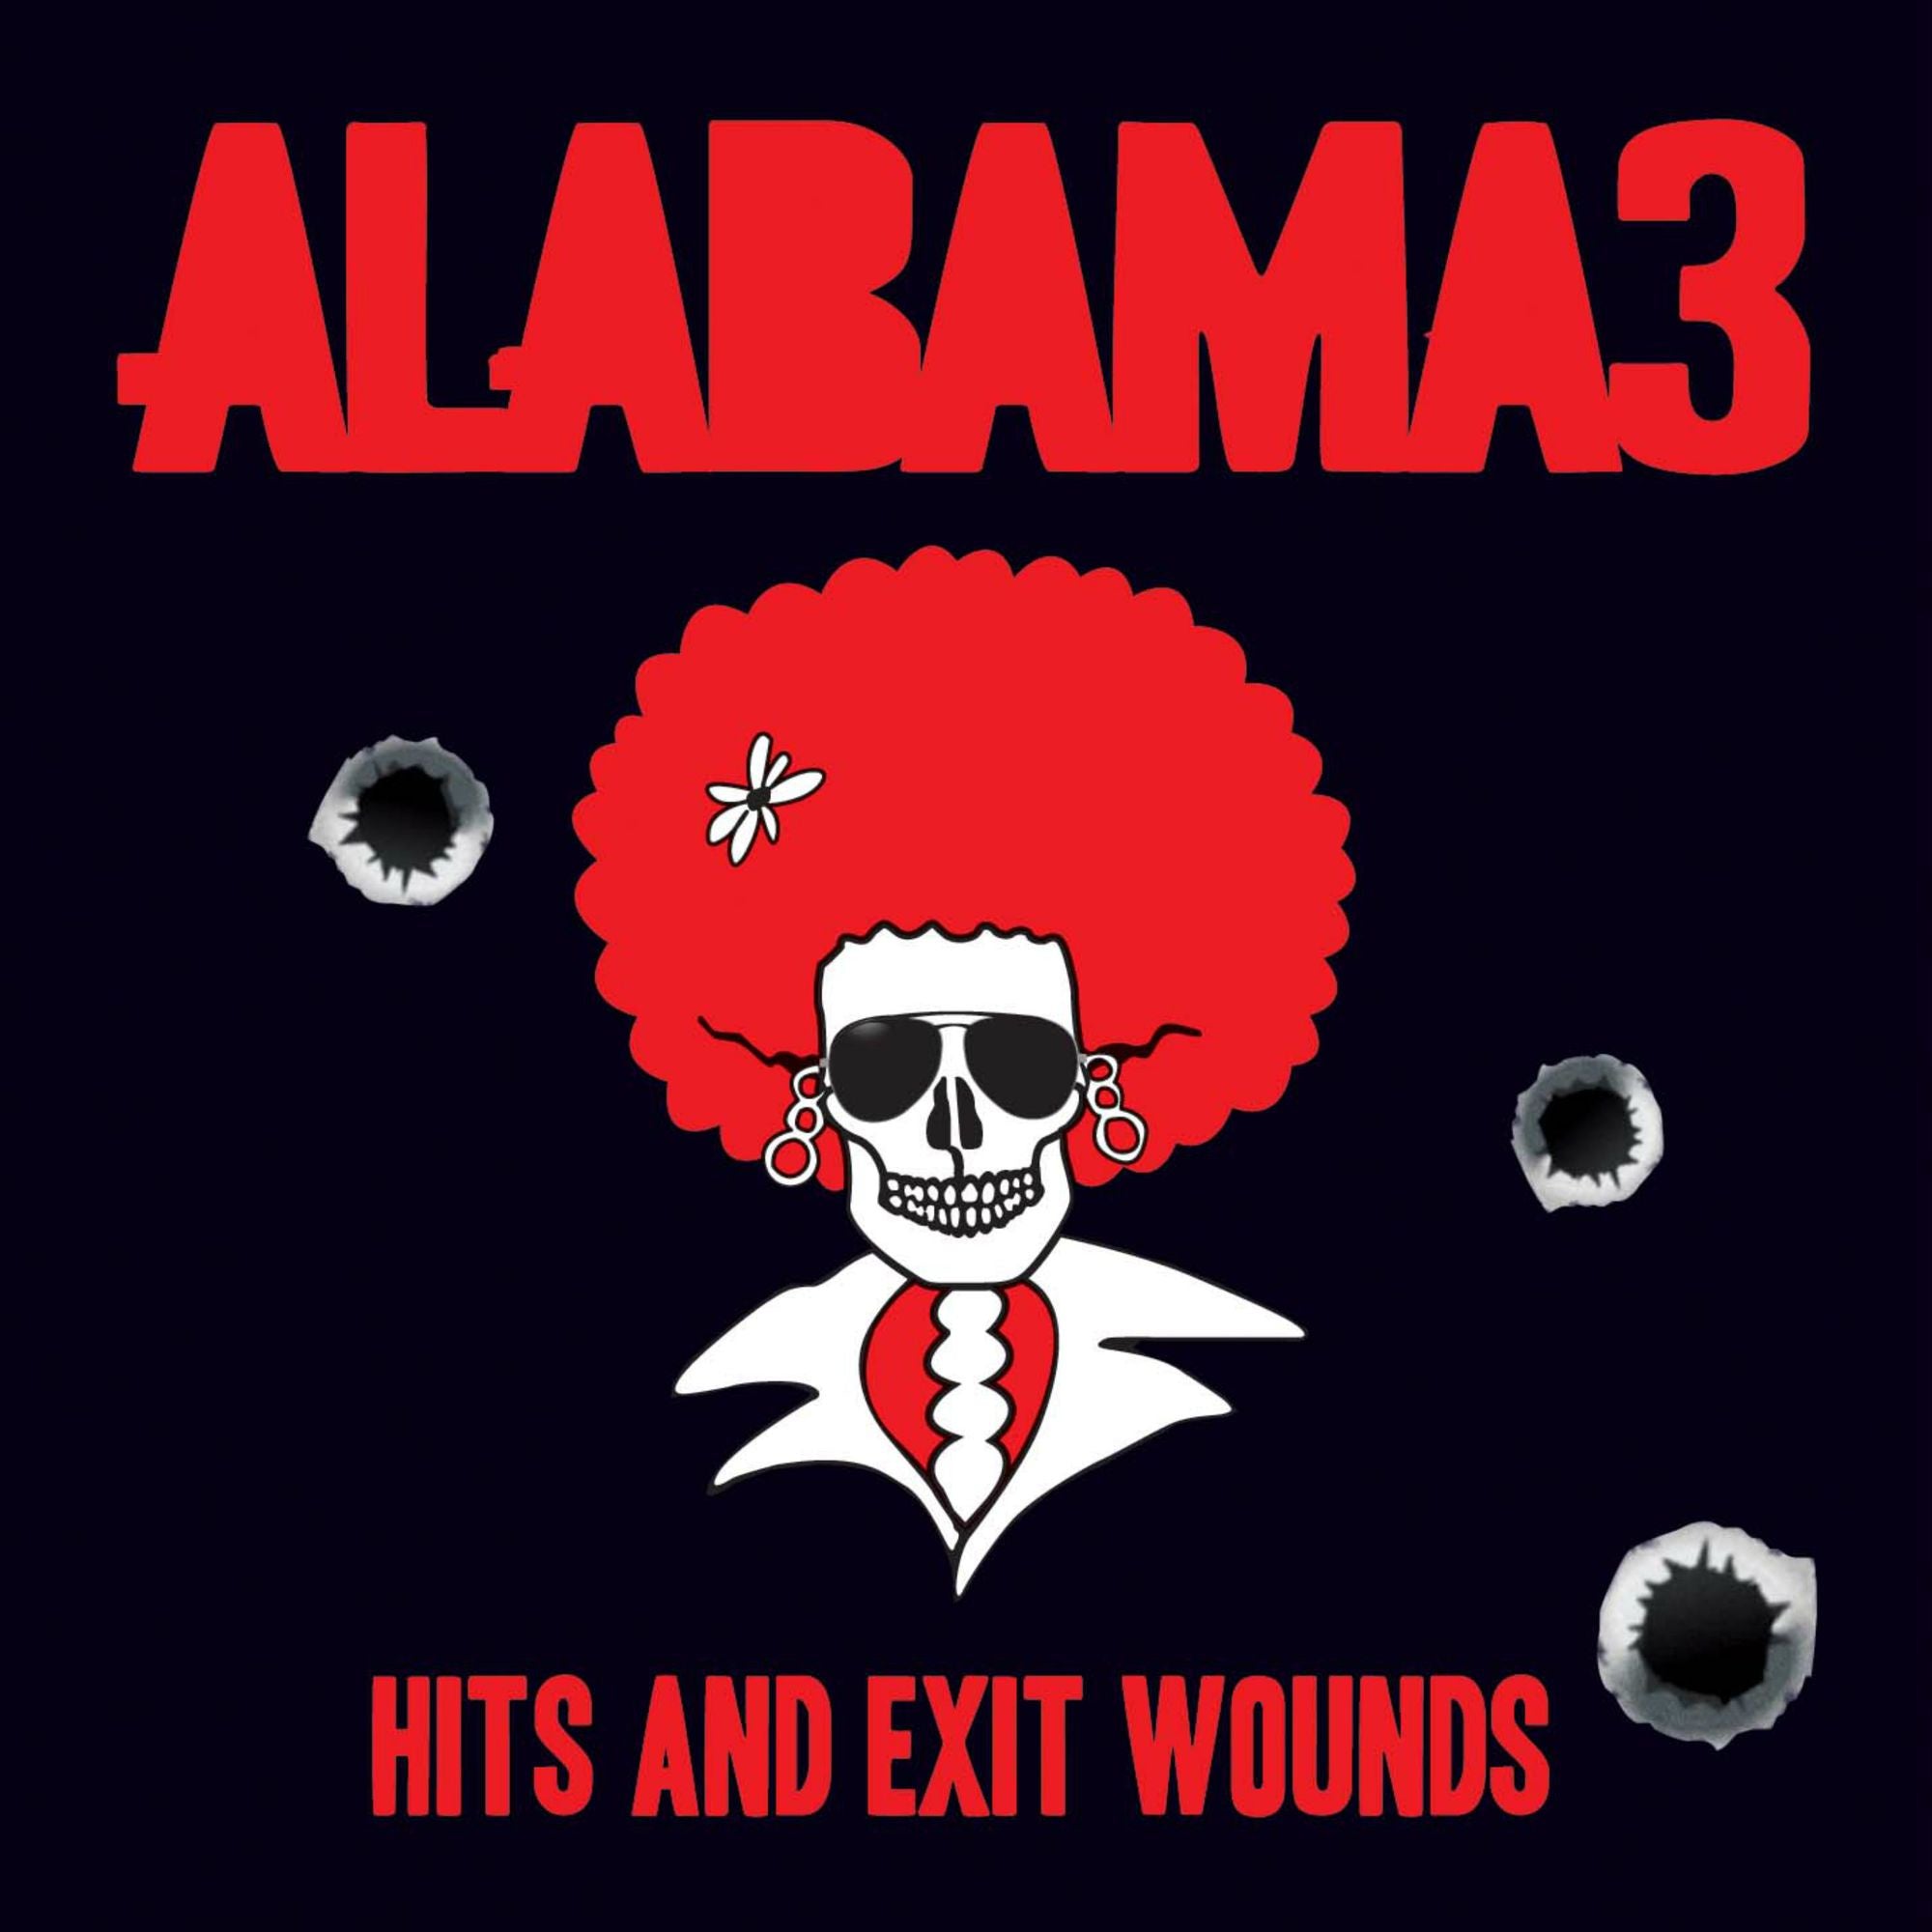 Alabama 3 - Hits And Exit Wounds - New Vinyl Lp 2018 One Little Indian Limited Edition Pressing on Colored Vinyl with Download - House / Country Rock